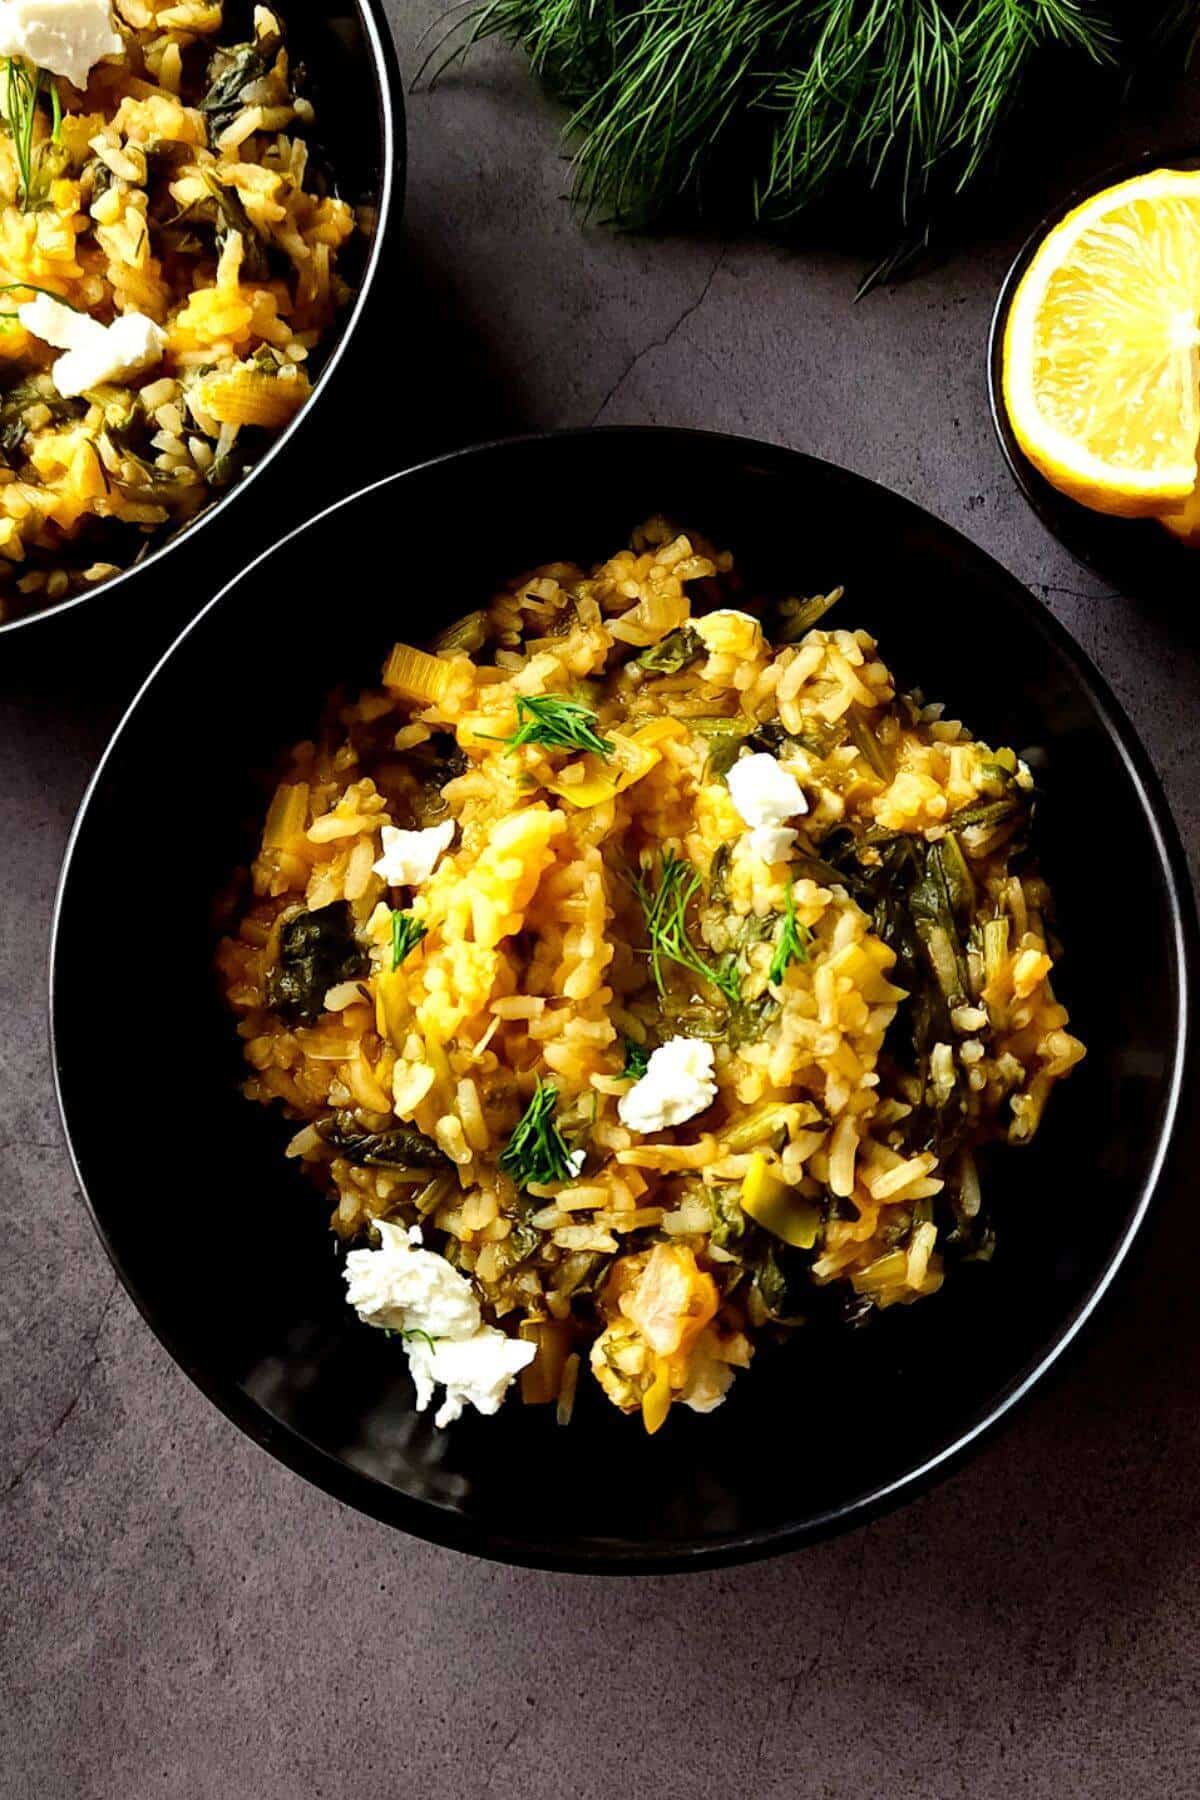 Greek rice with spinach and feta served in two black bowls.